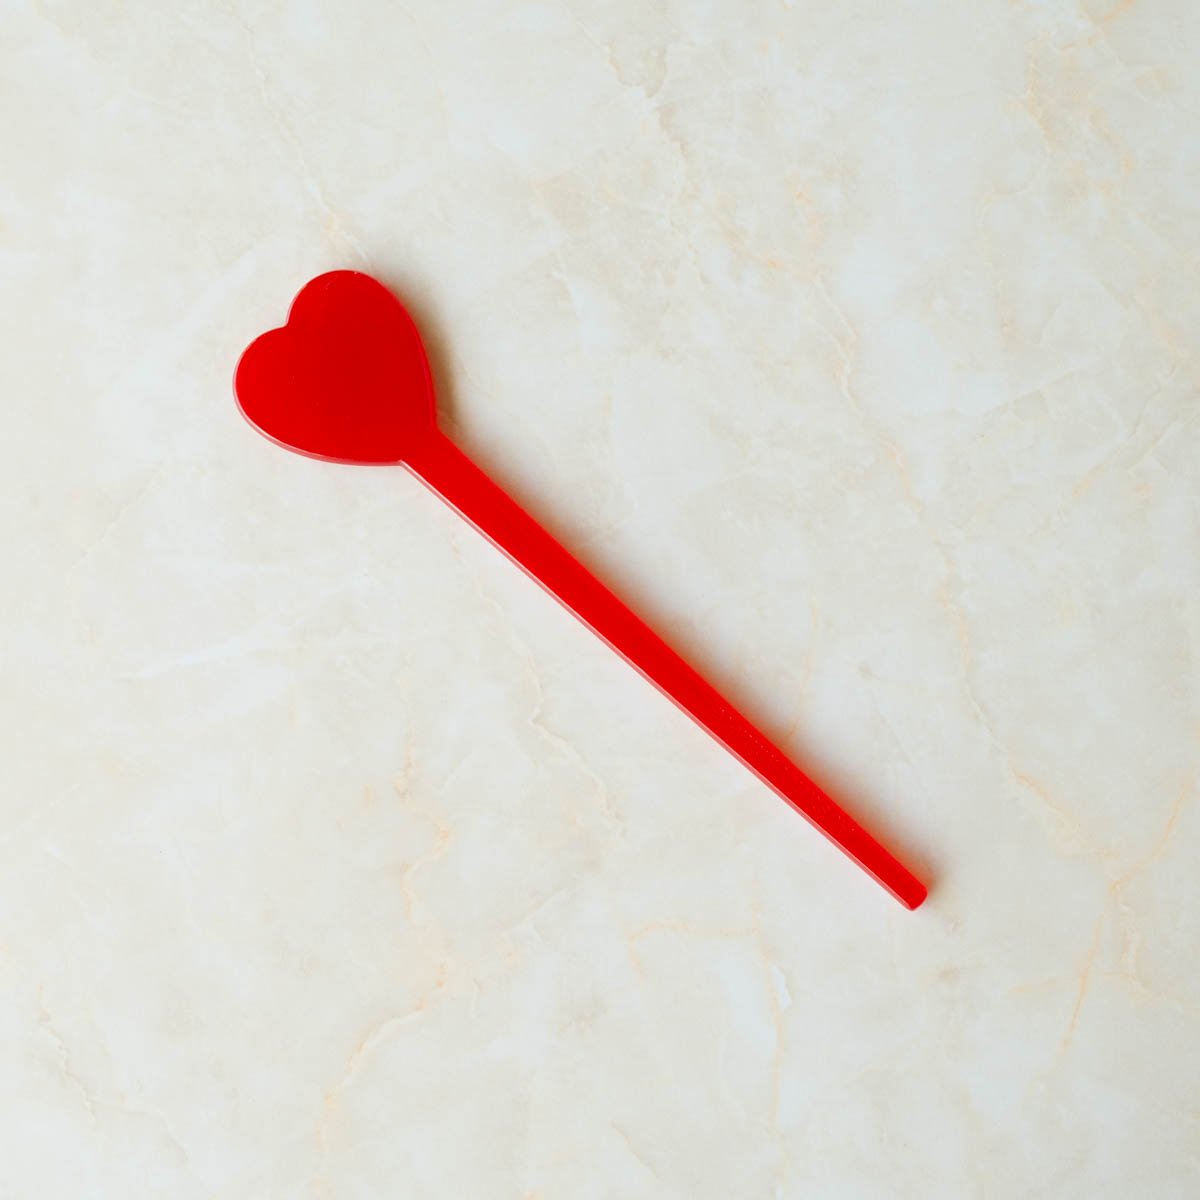 Acetate hair stick with a heart shaped topper in a shade of bright red. Shown flat.